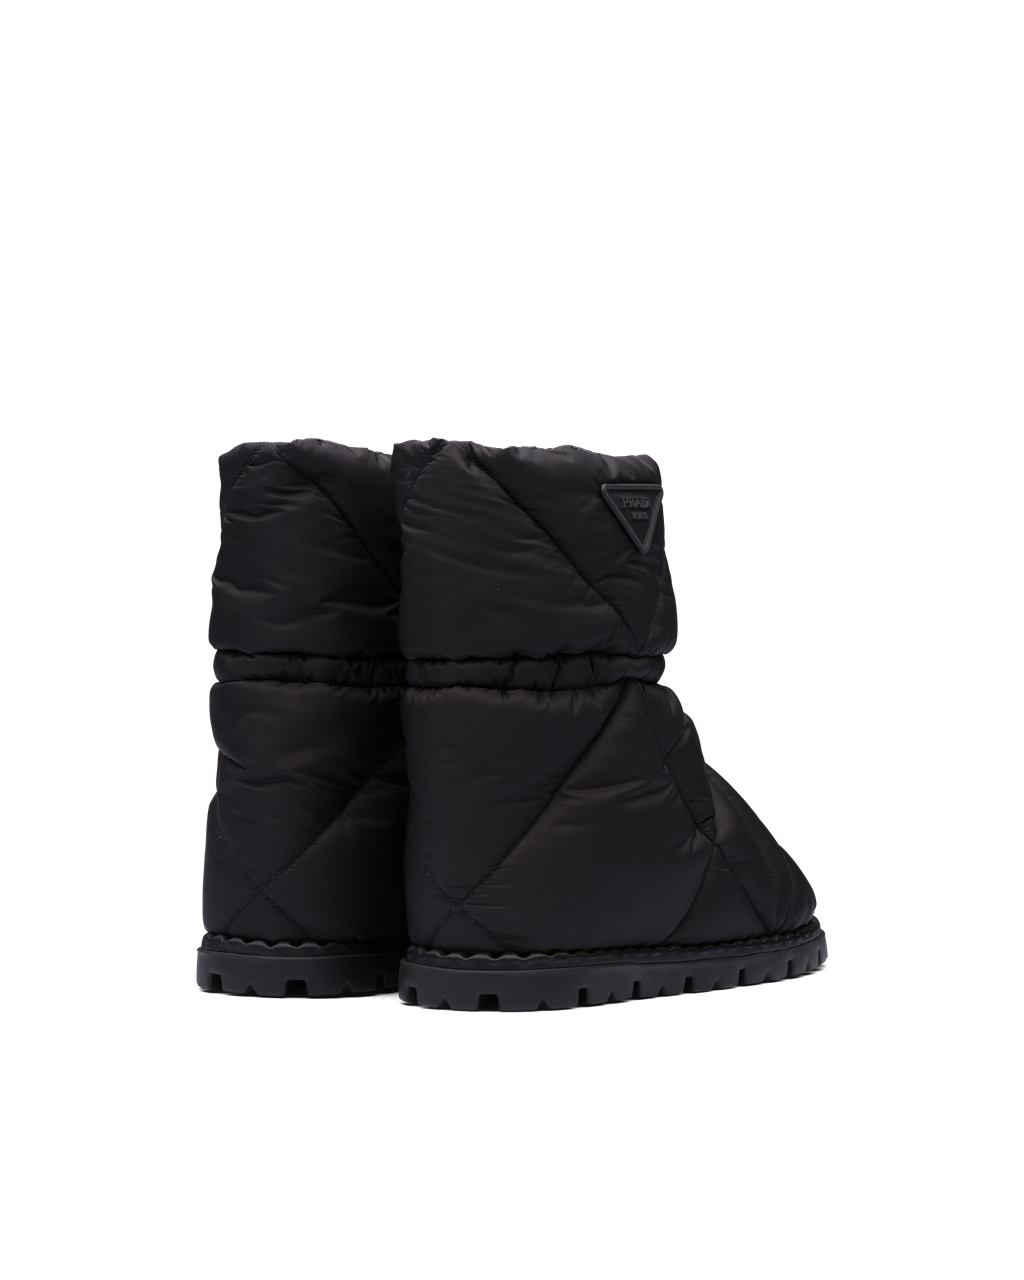 Prada Quilted Nylon Fabric Booties Black | 56EQHMUFX